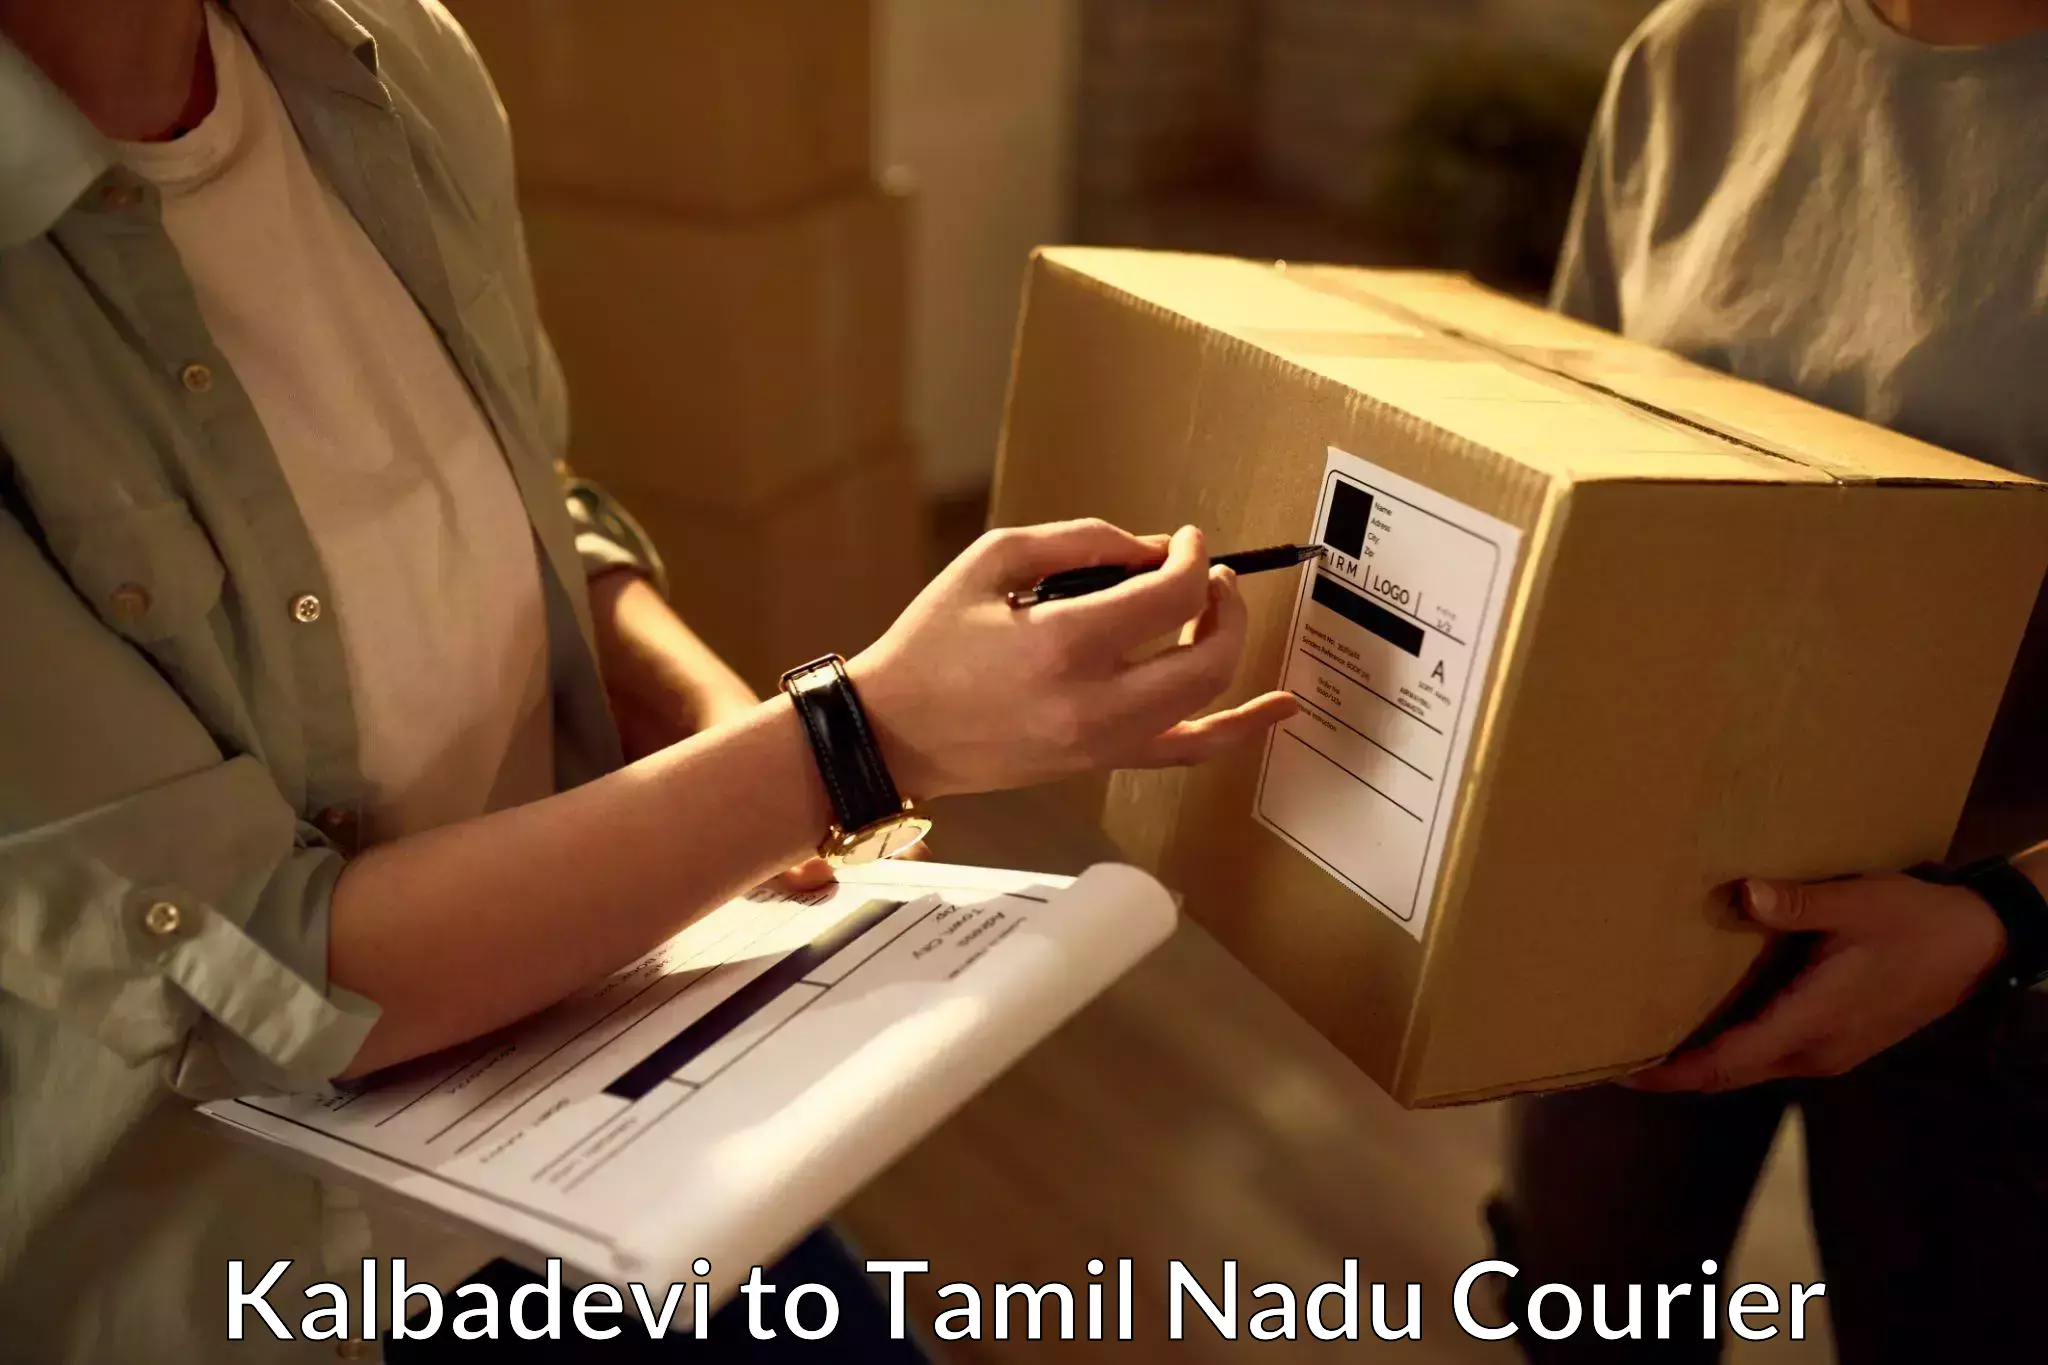 Courier rate comparison Kalbadevi to Chennai Port